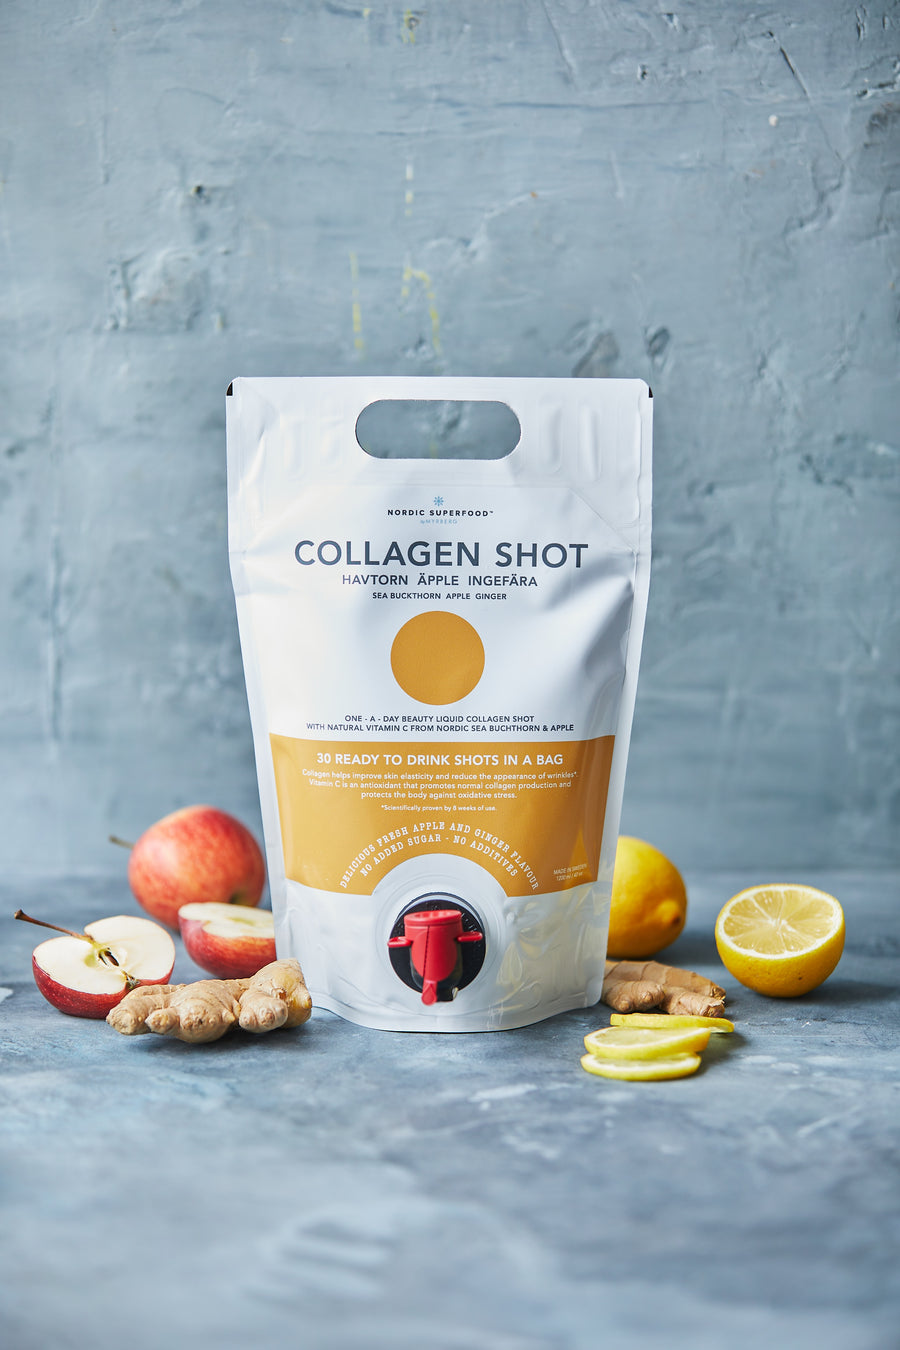 COLLAGEN SHOT prenumeration - Beauty in a Bag - Nordic Superfood by Myrberg